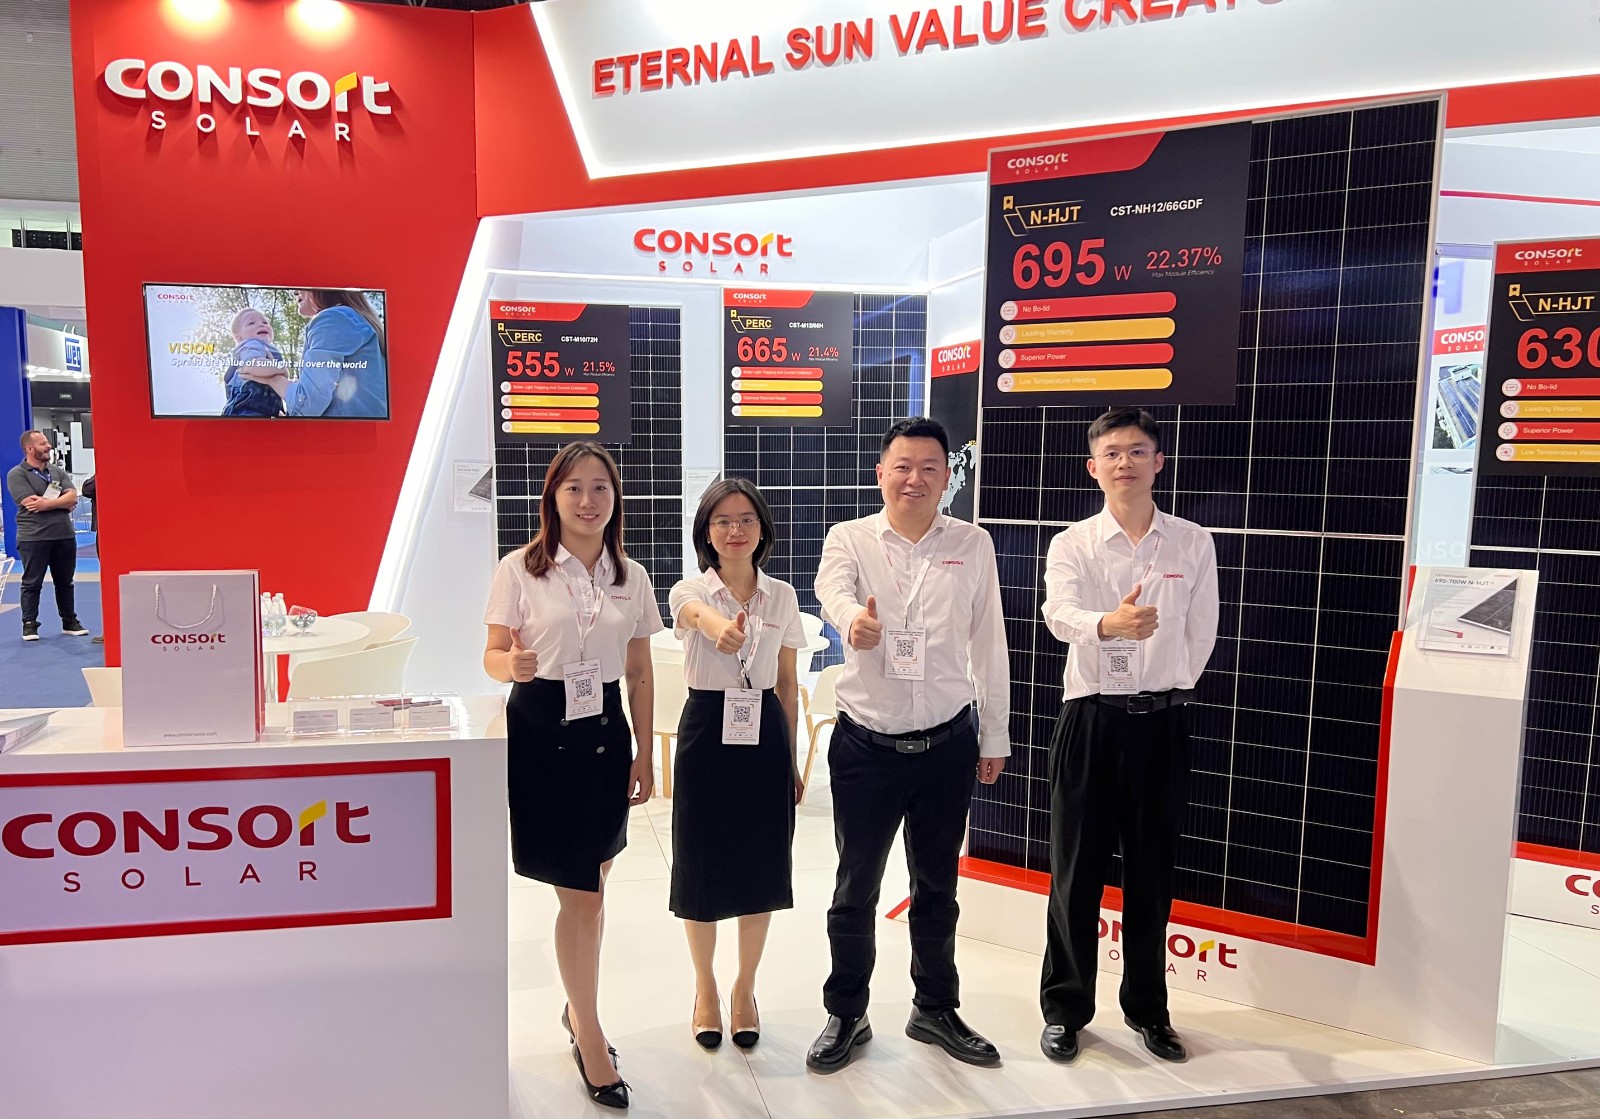 Consort Solar at the 8th Brazilian Renewable Energy & Distributed Generation Expo in South America